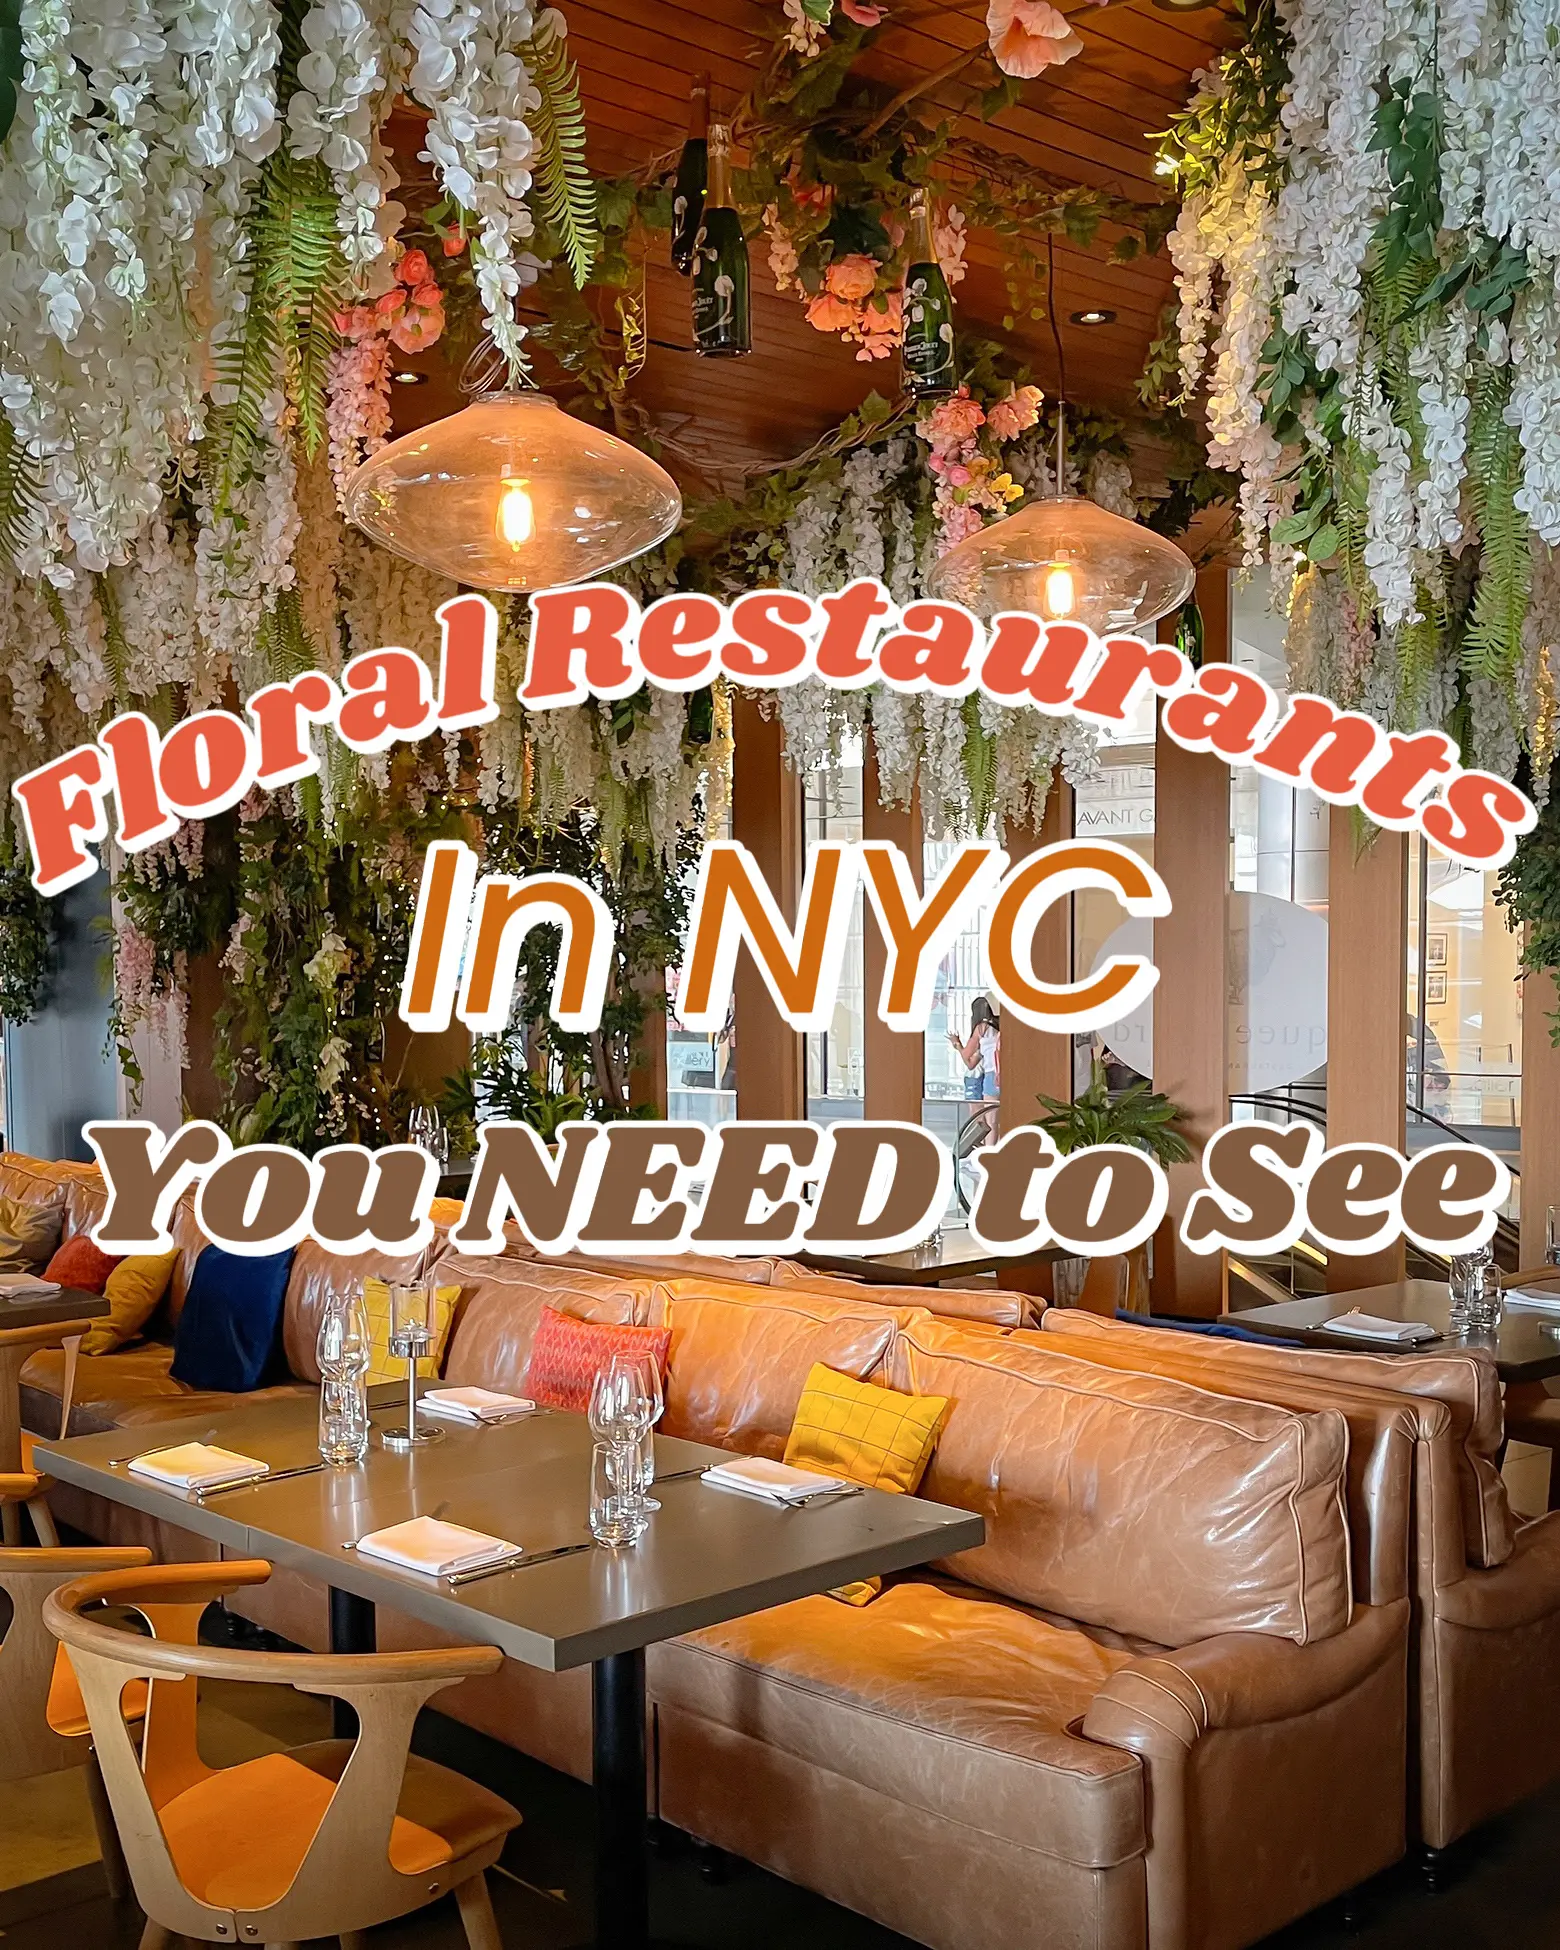  A restaurant with a floral theme and a NYC logo.